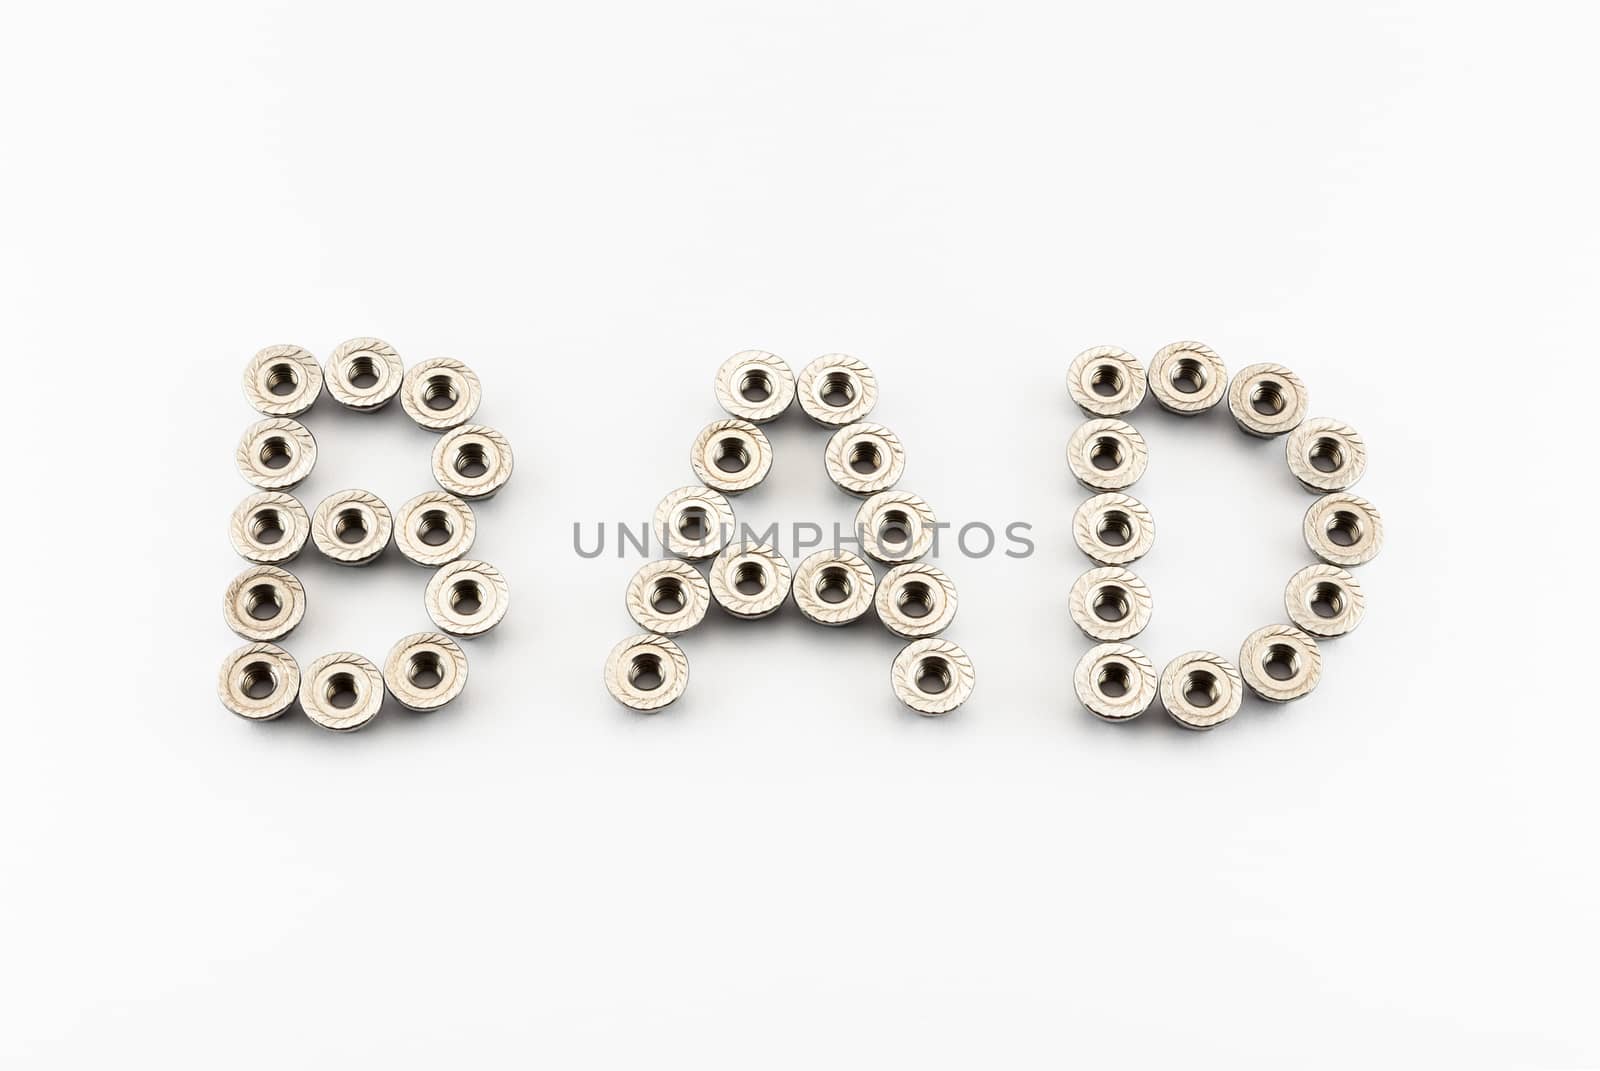 BAD Word Created by Stainless Steel Hex Flange Nuts.